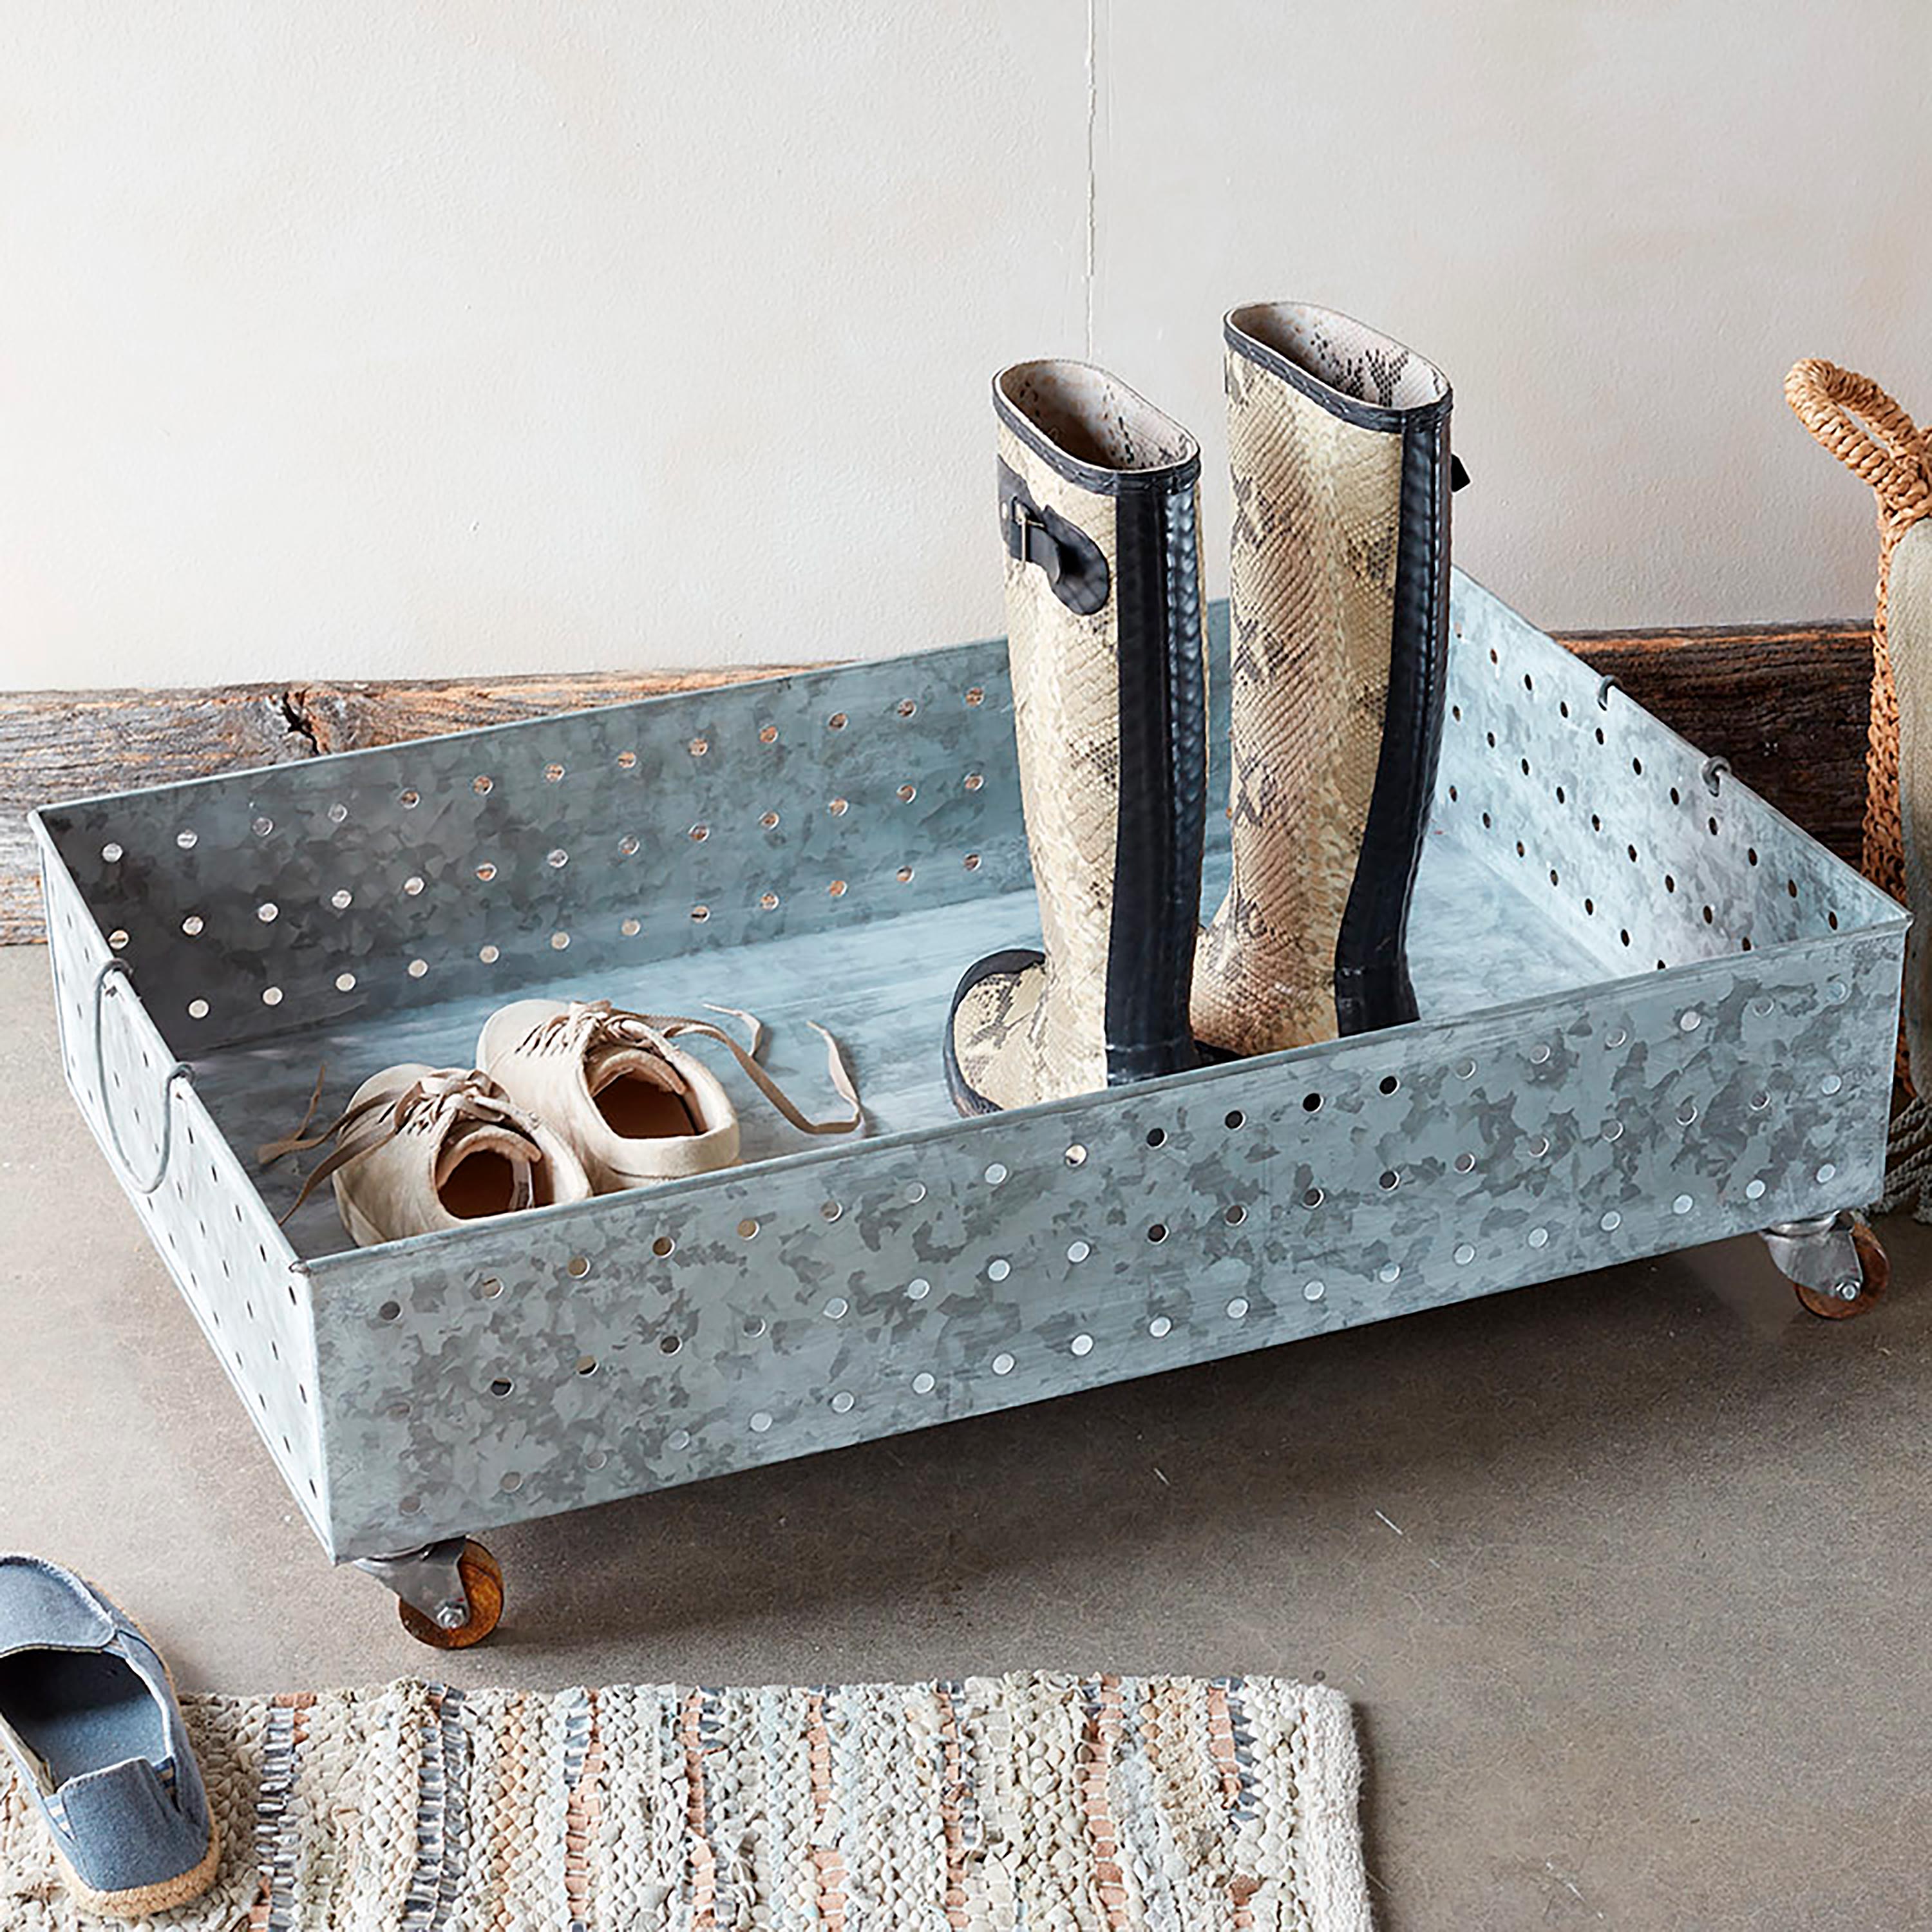 Copper-Finished Galvanized Steel Basketweave Boot Tray